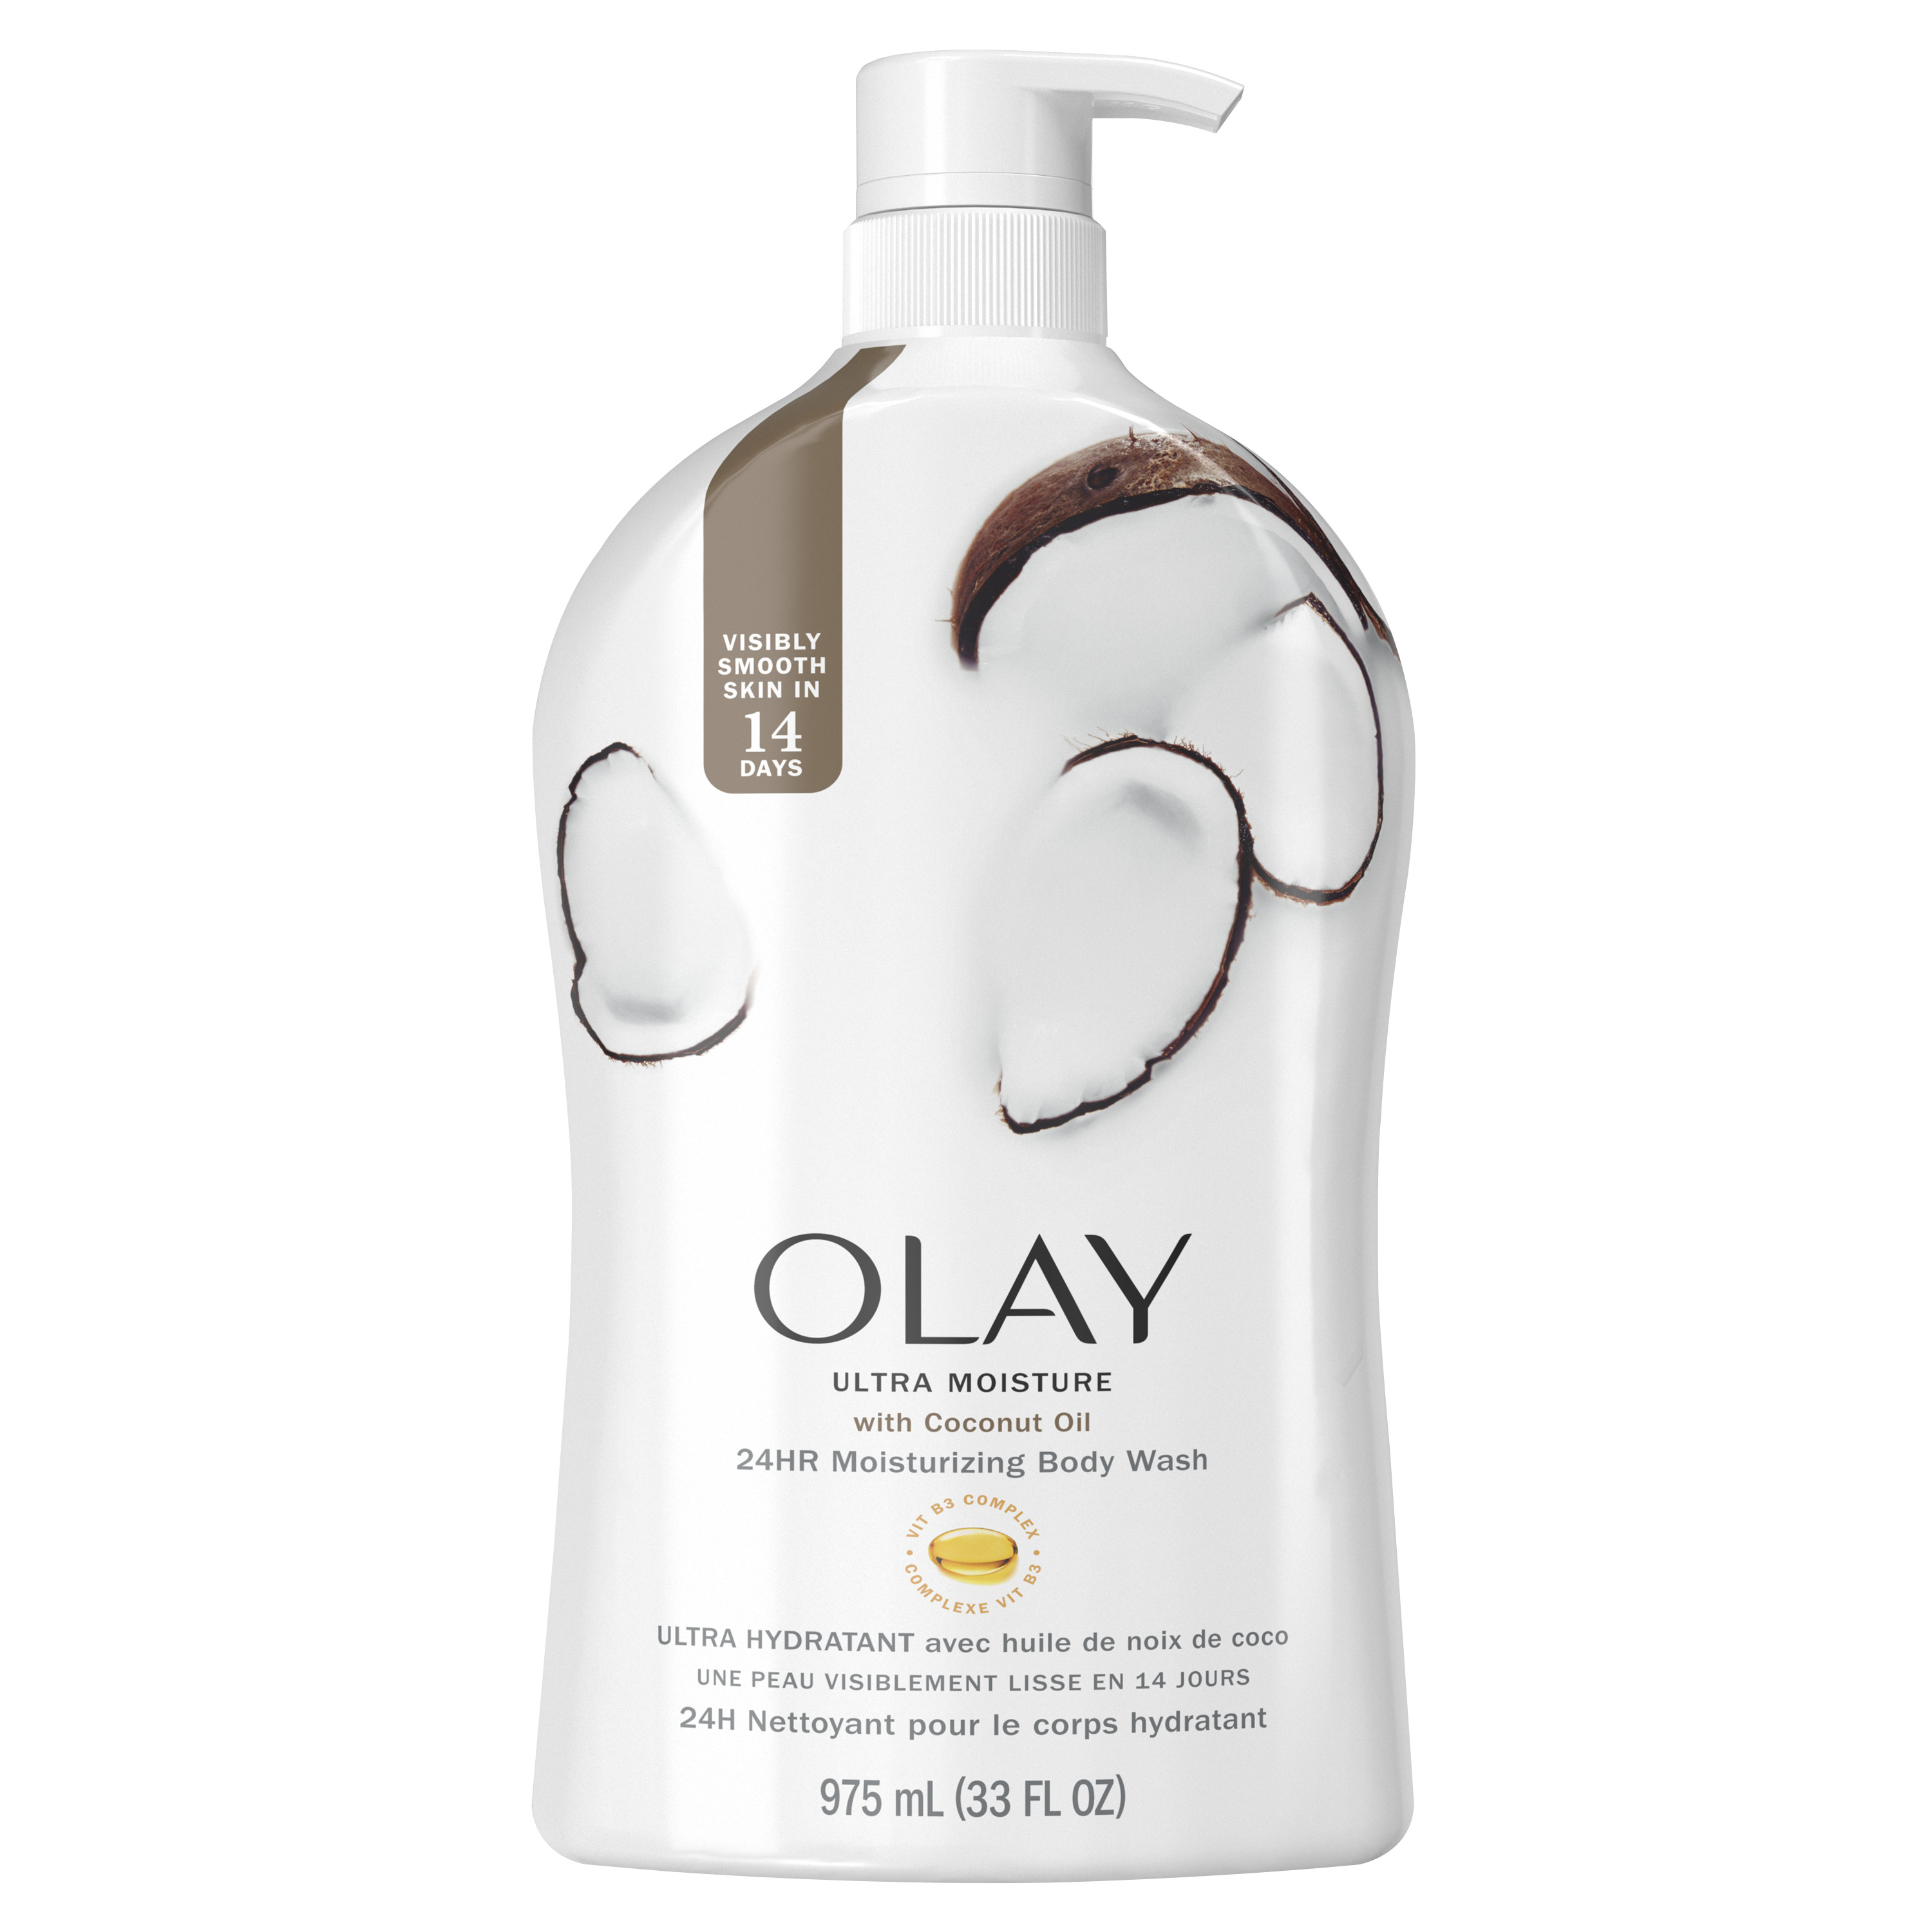 Olay Ultra Moisture Body Wash with Coconut Oil, 33 fl oz - image 3 of 11